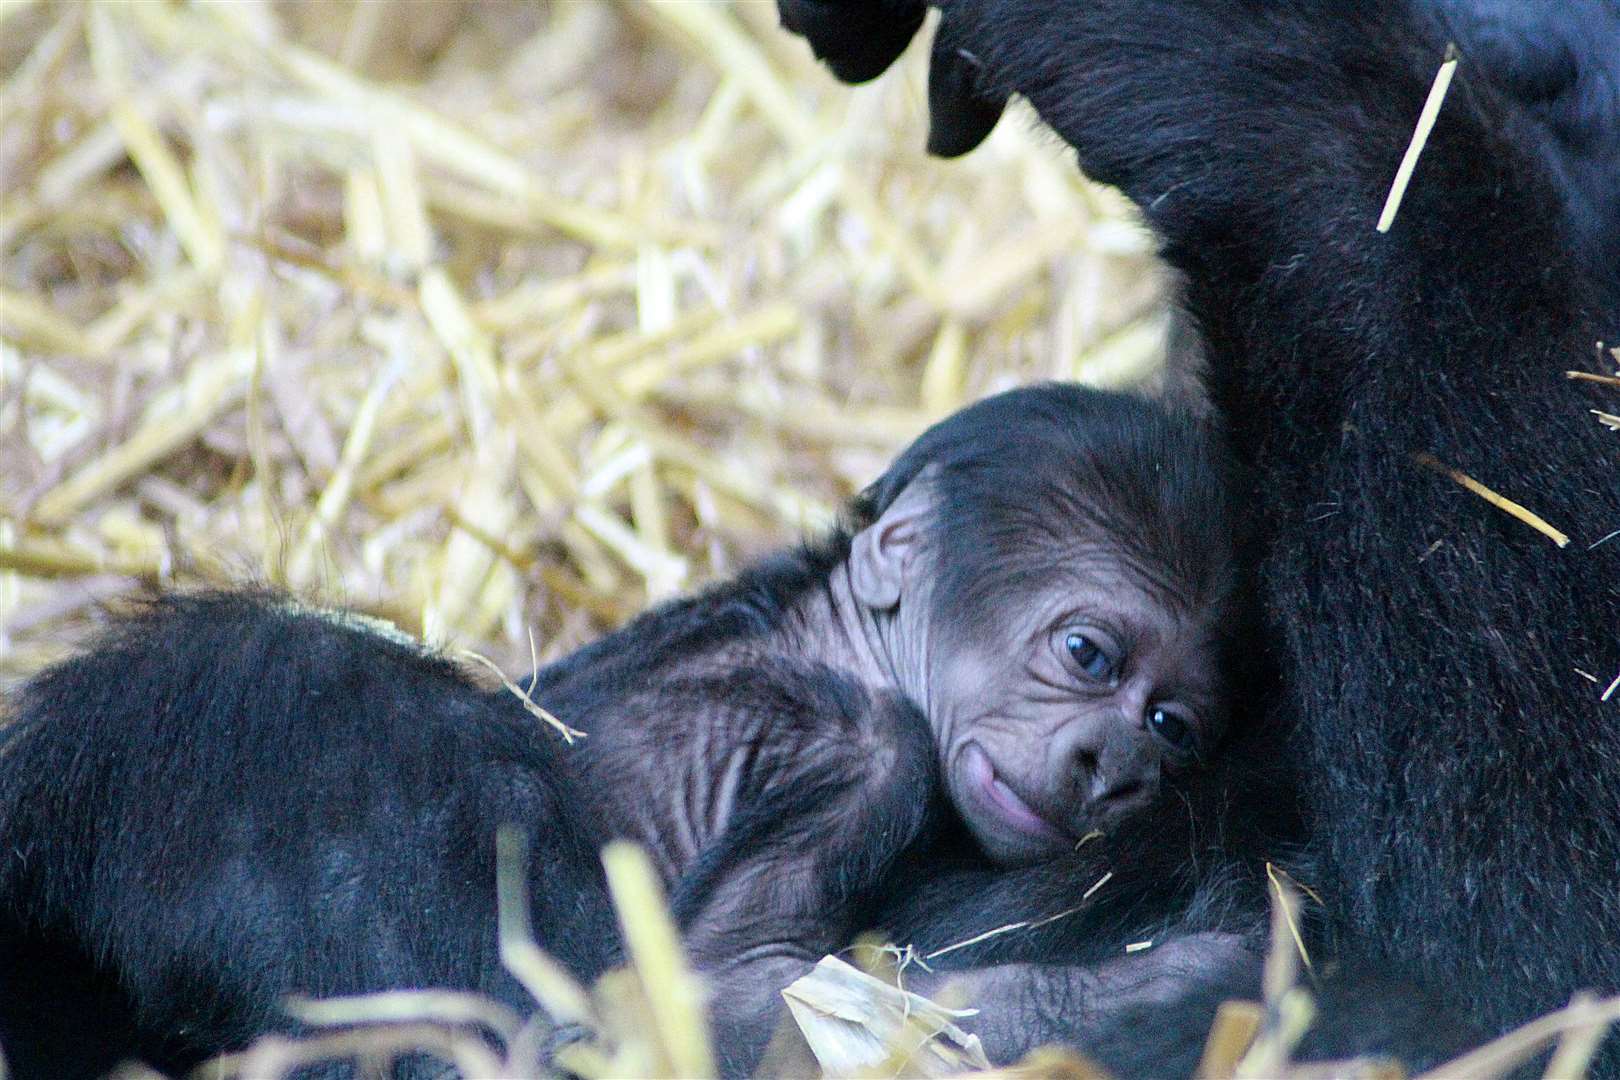 A new baby gorilla born at Port Lympne earlier this year. Photo credit: Leanne Smith